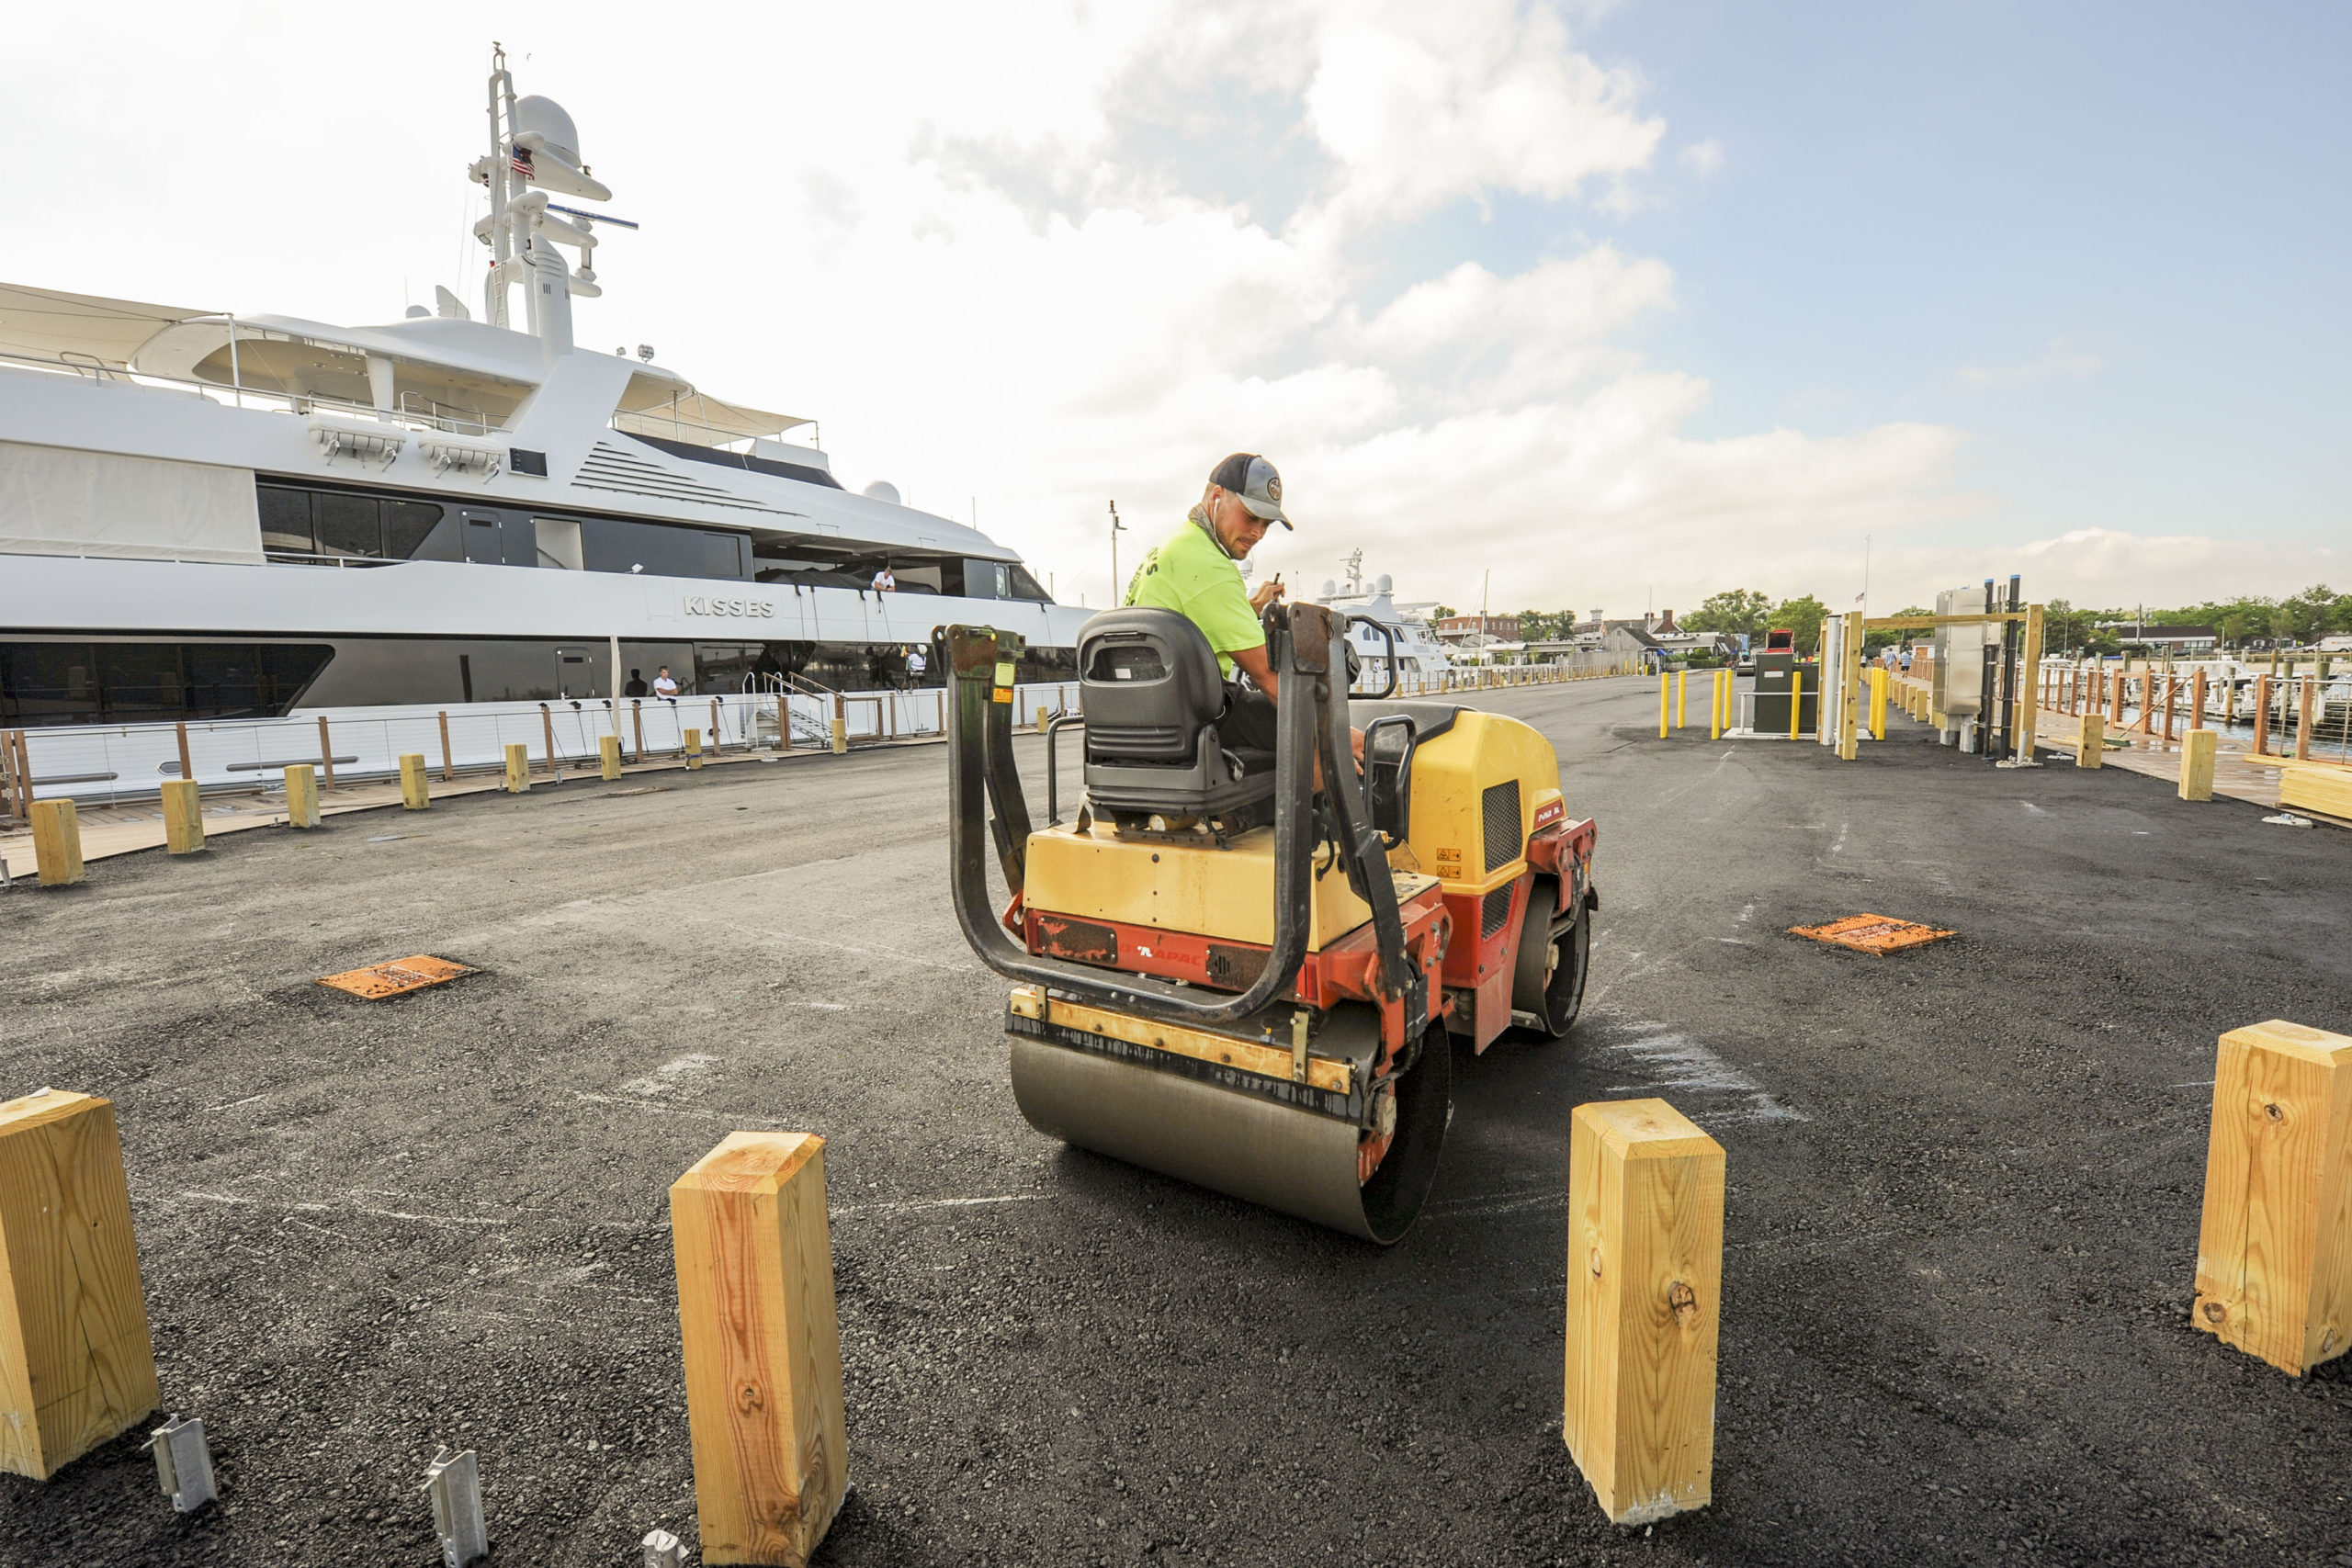 Workers were busy paving Long Wharf in Sag Harbor in anticipation of its reopening in time for the July 4 weekend. MICHAEL HELLER